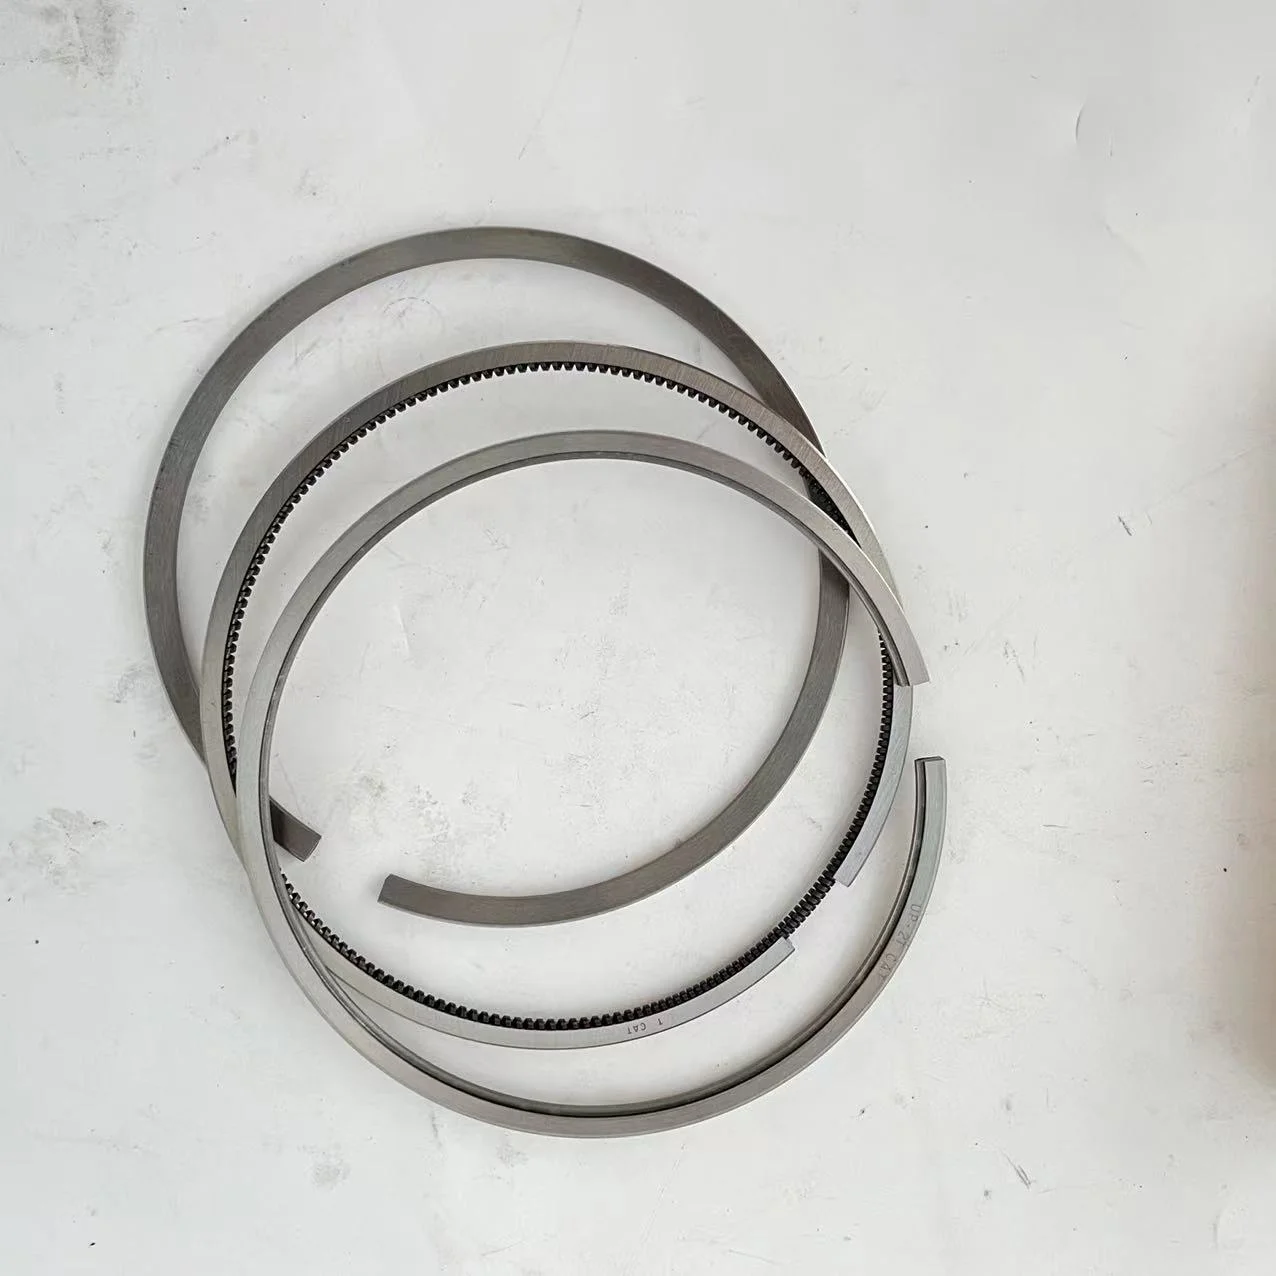 High Quality OEM Piston Ring Set 105mm STD 7E5213 For 3116 3114 Diesel Engines